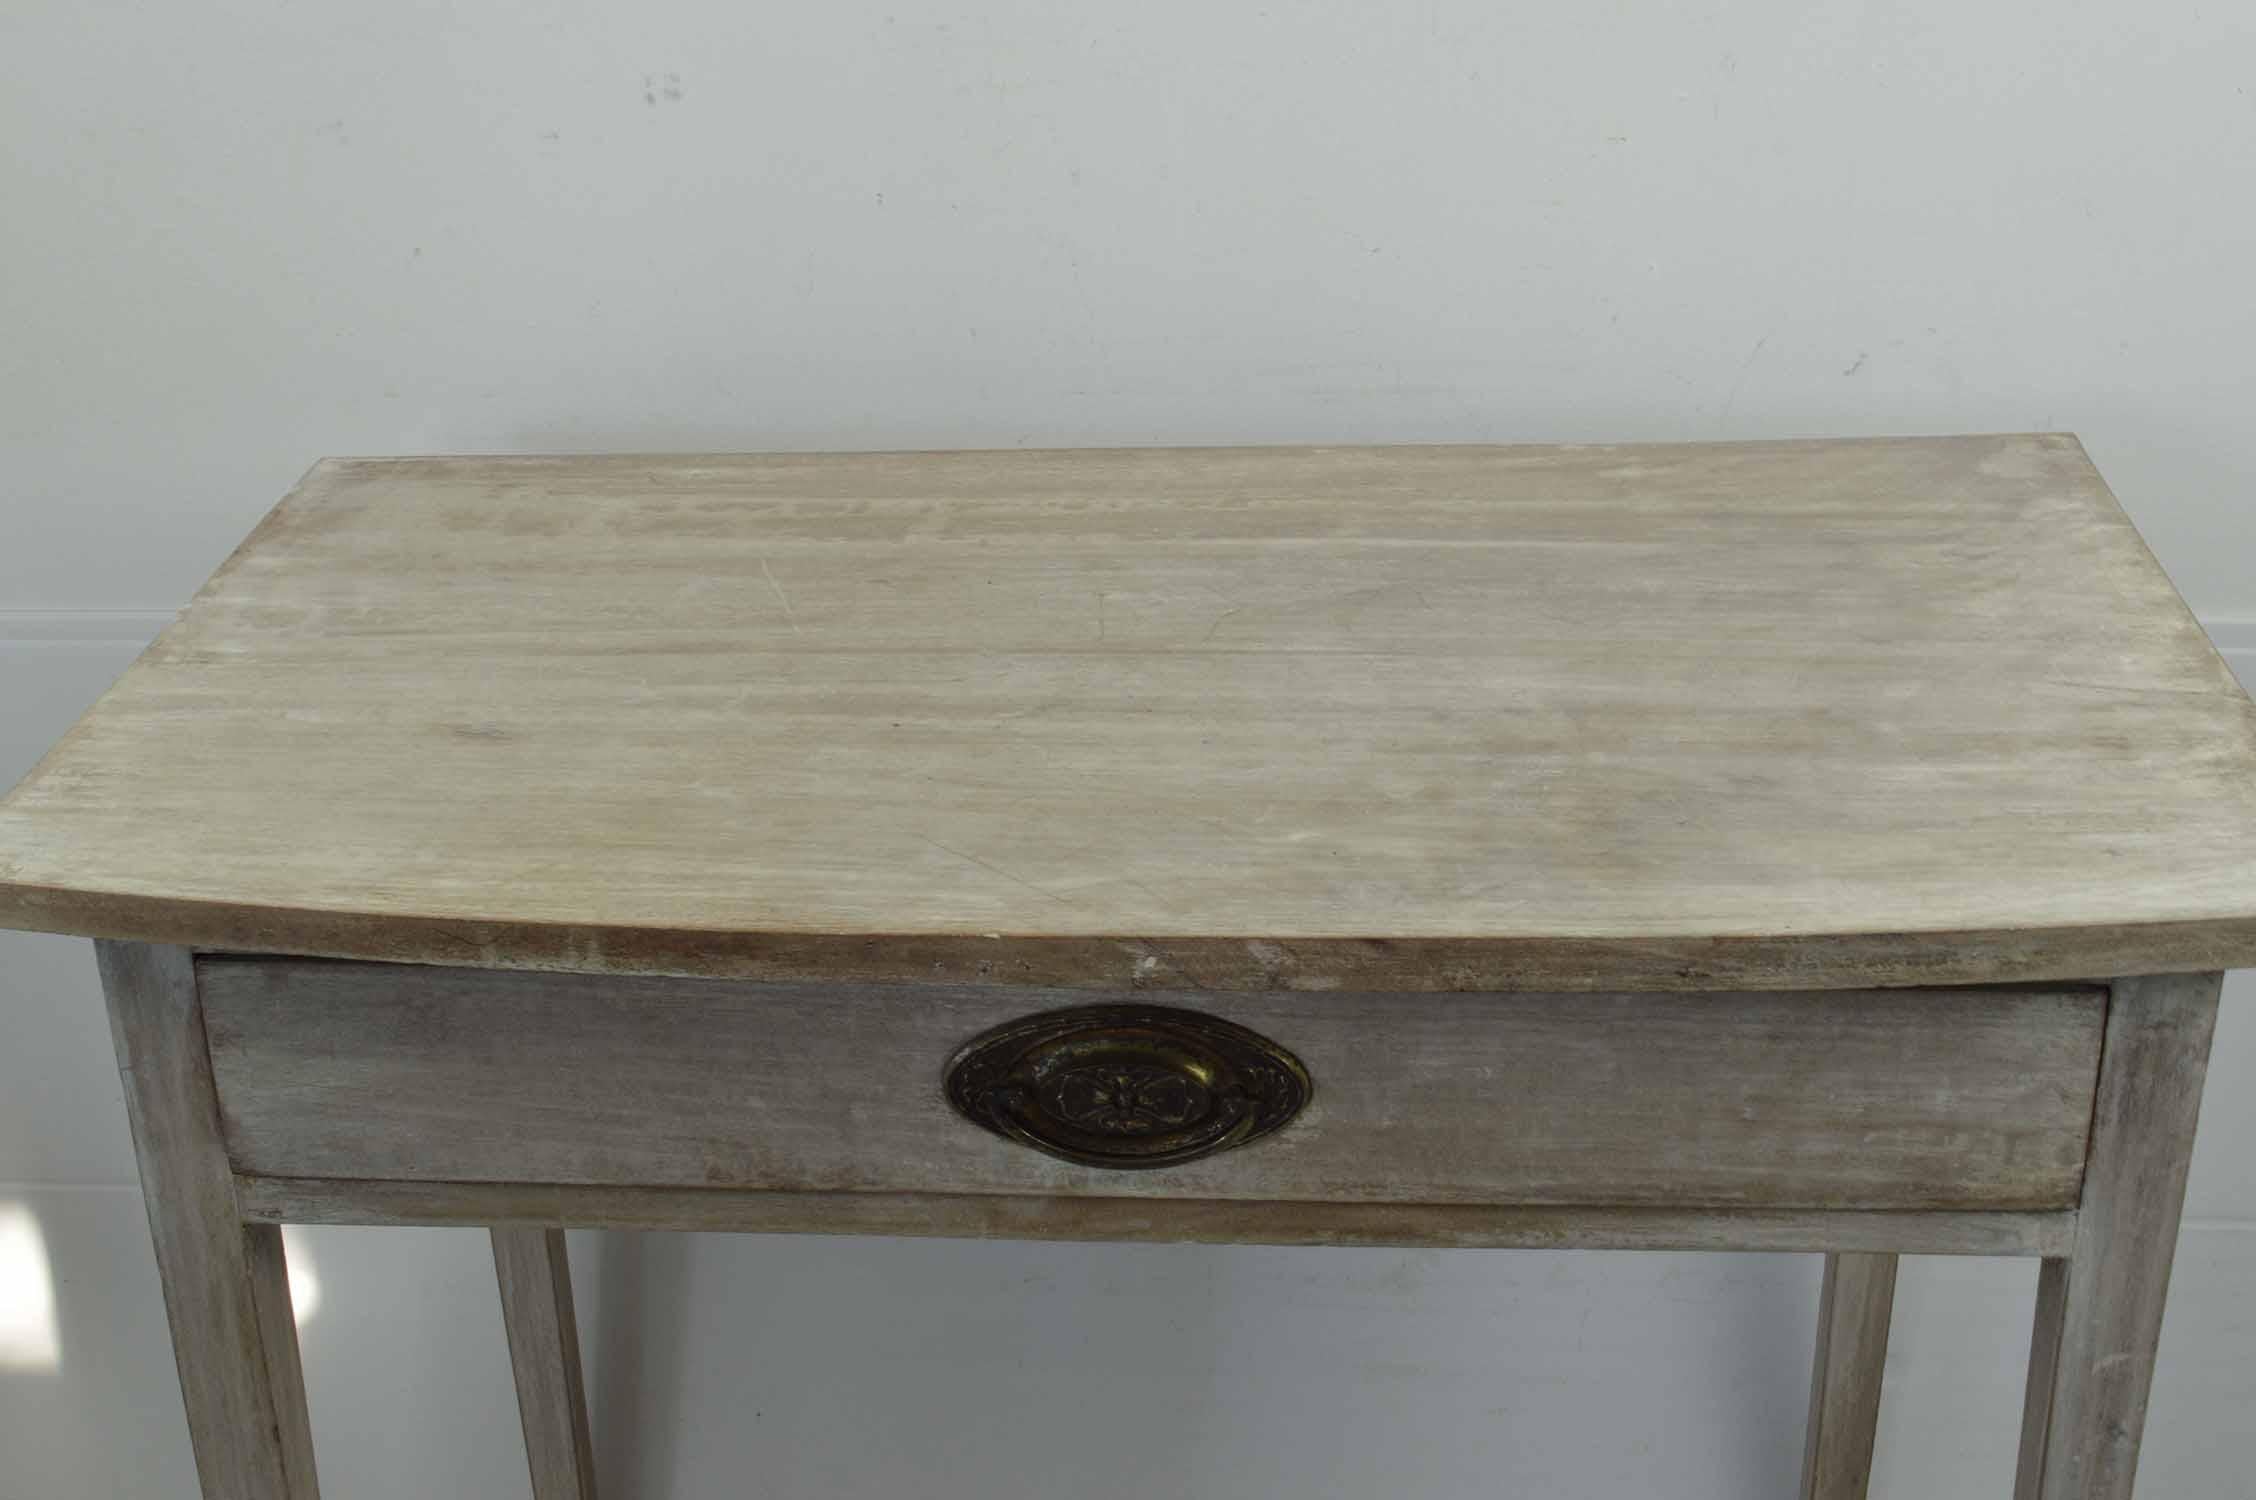 Early 19th Century Antique Gustavian Style Bleached Mahogany Side Table, circa 1800